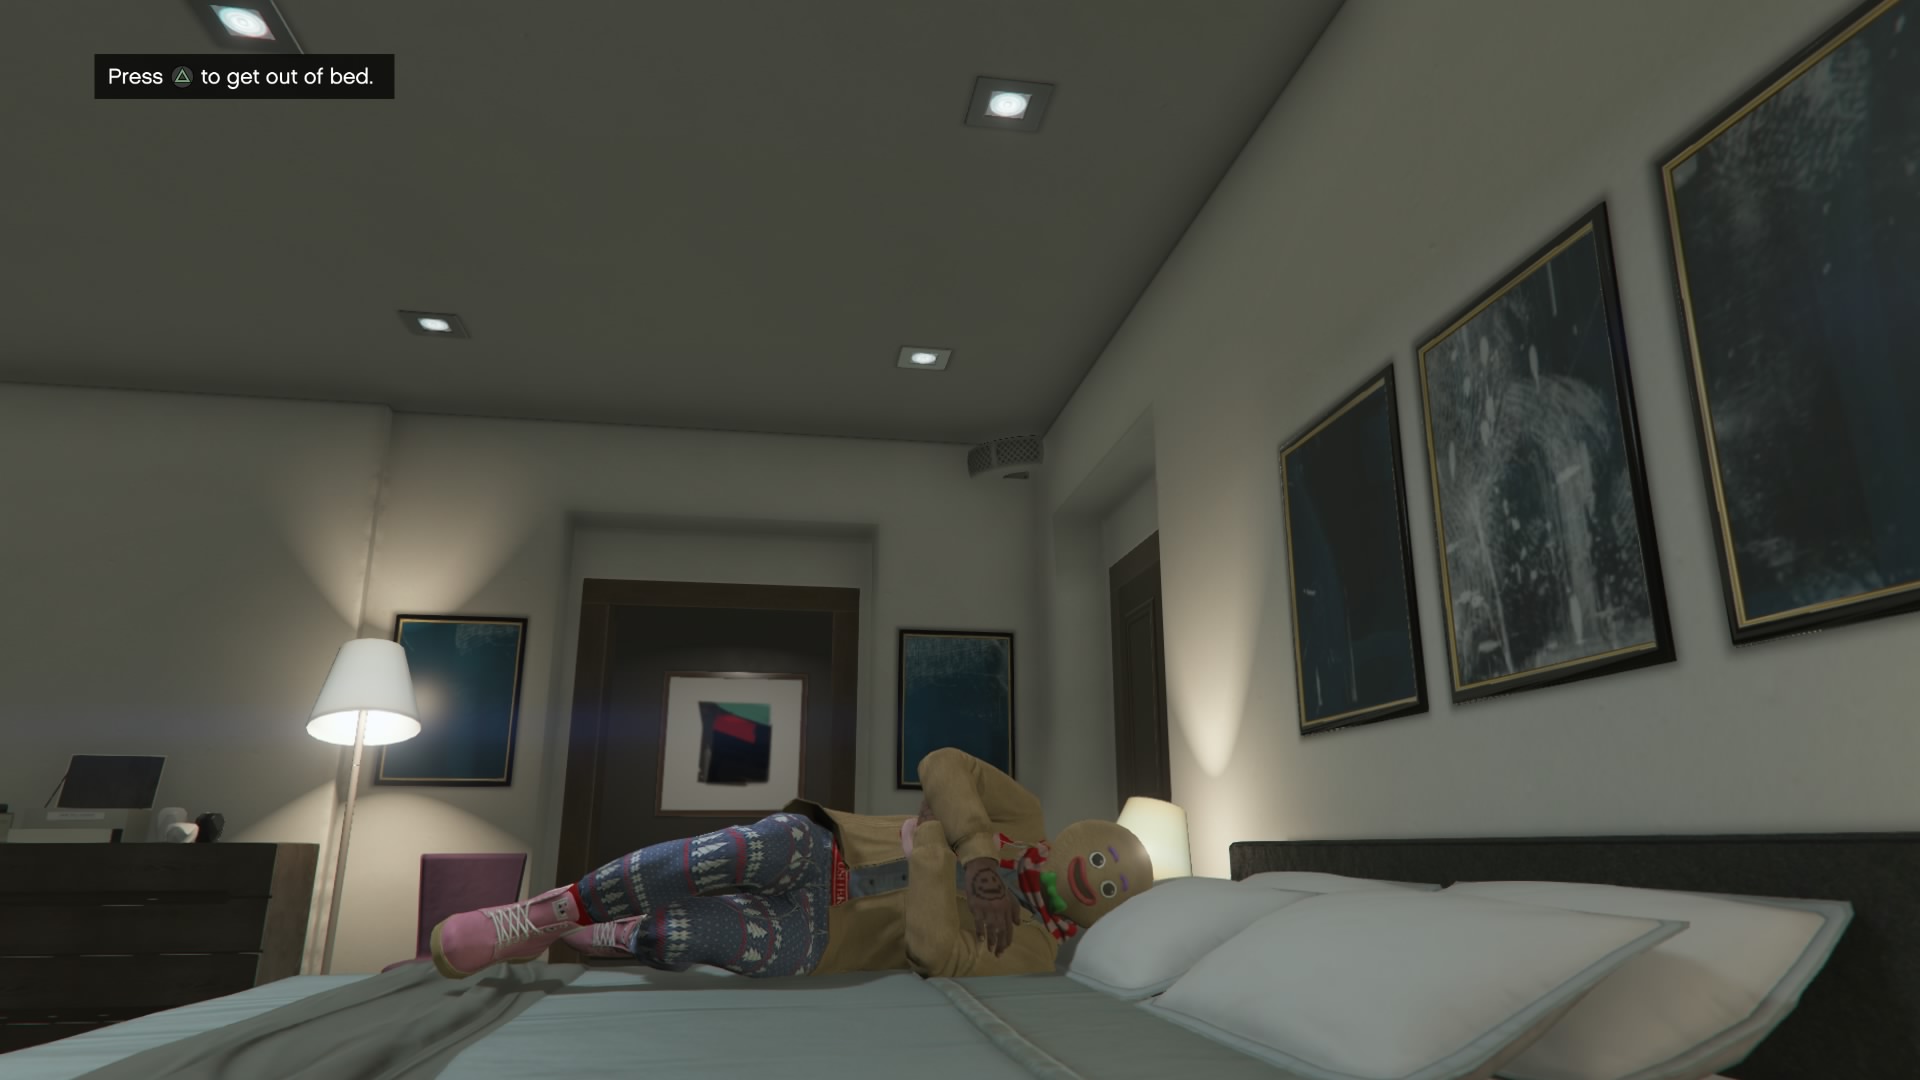 GTA Online’s Gingerbread Mask Makes Everything Better